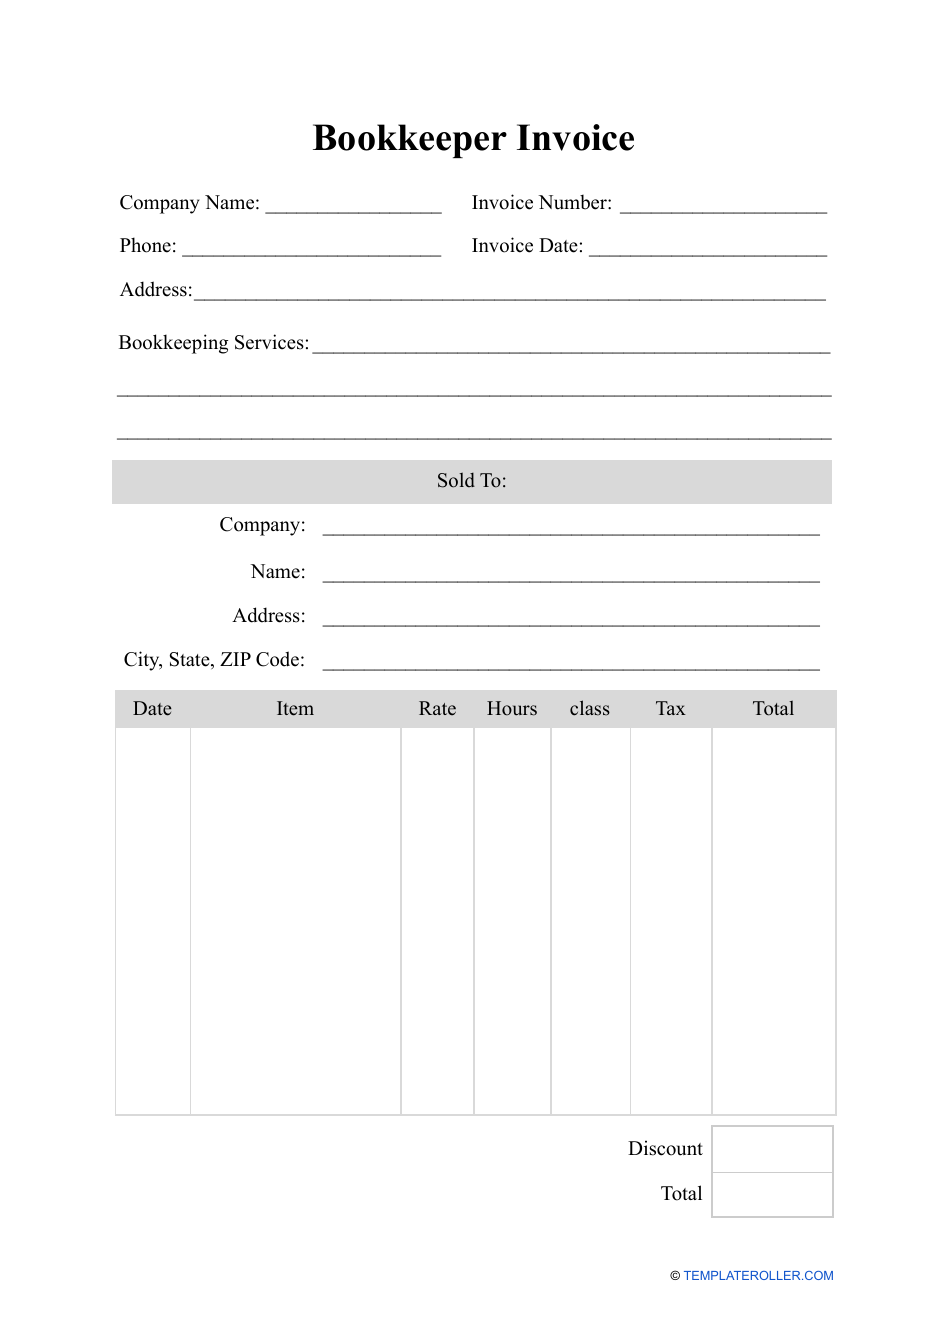 Bookkeeper Invoice Template, Page 1